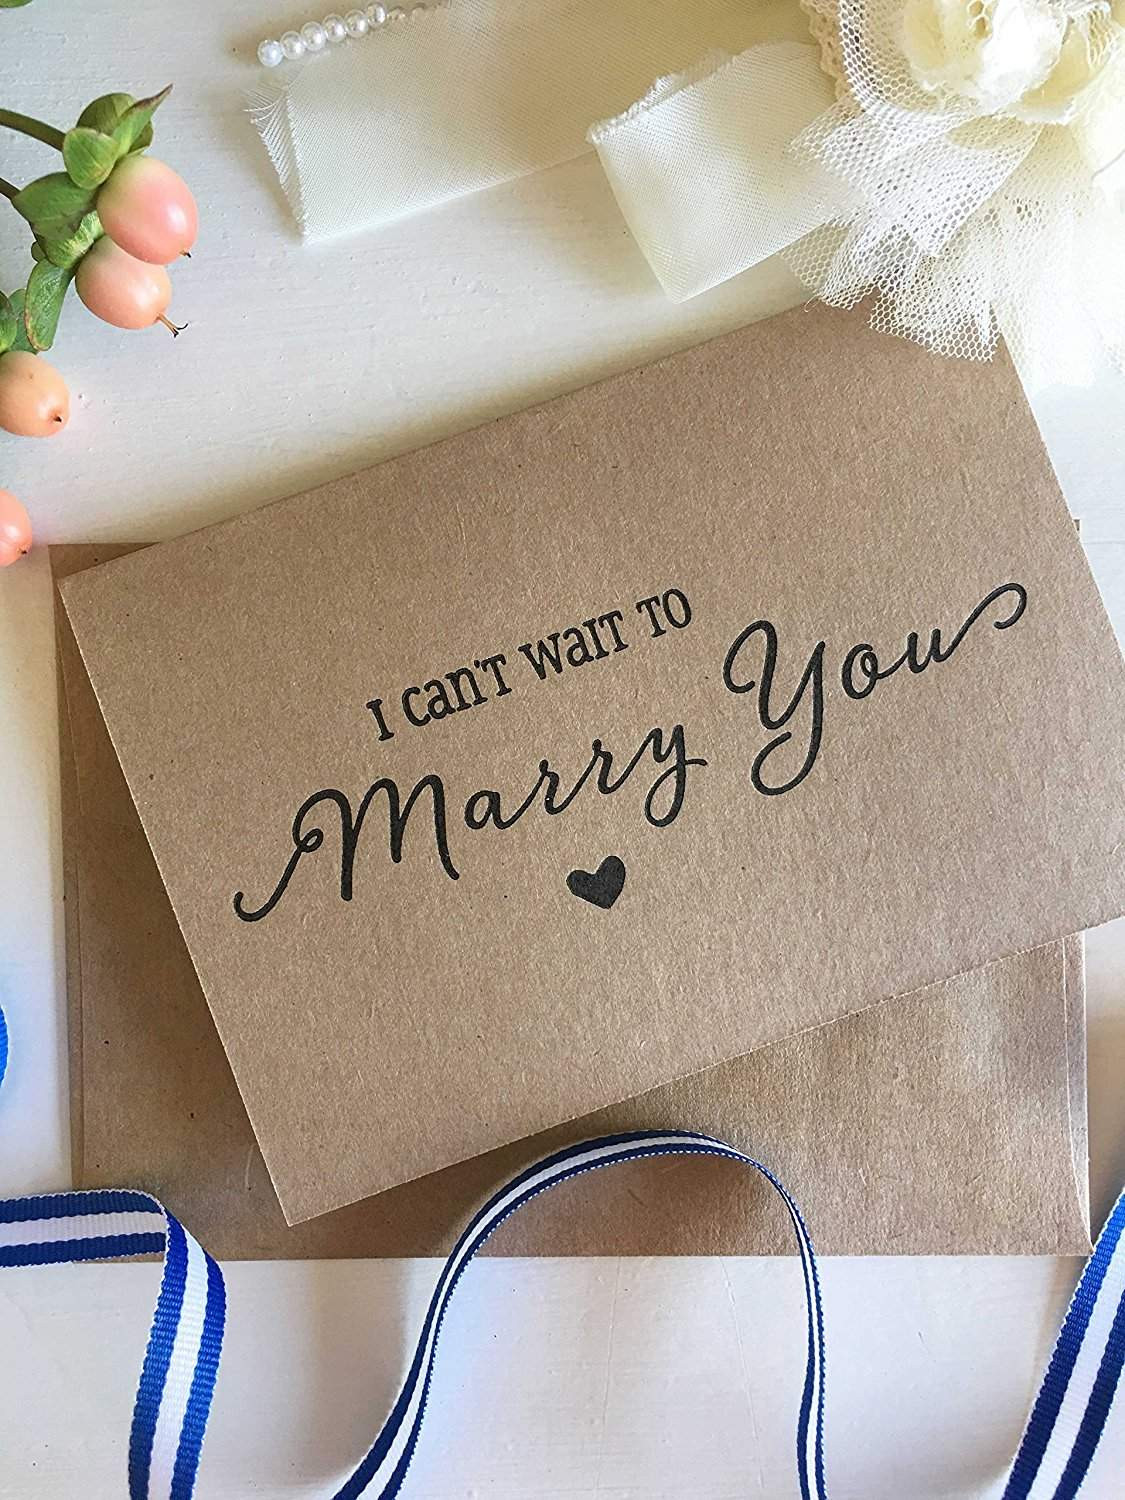 Wedding Gift From Groom To Bride Ideas
 Best Wedding Day Gift Ideas From the Bride to the Groom